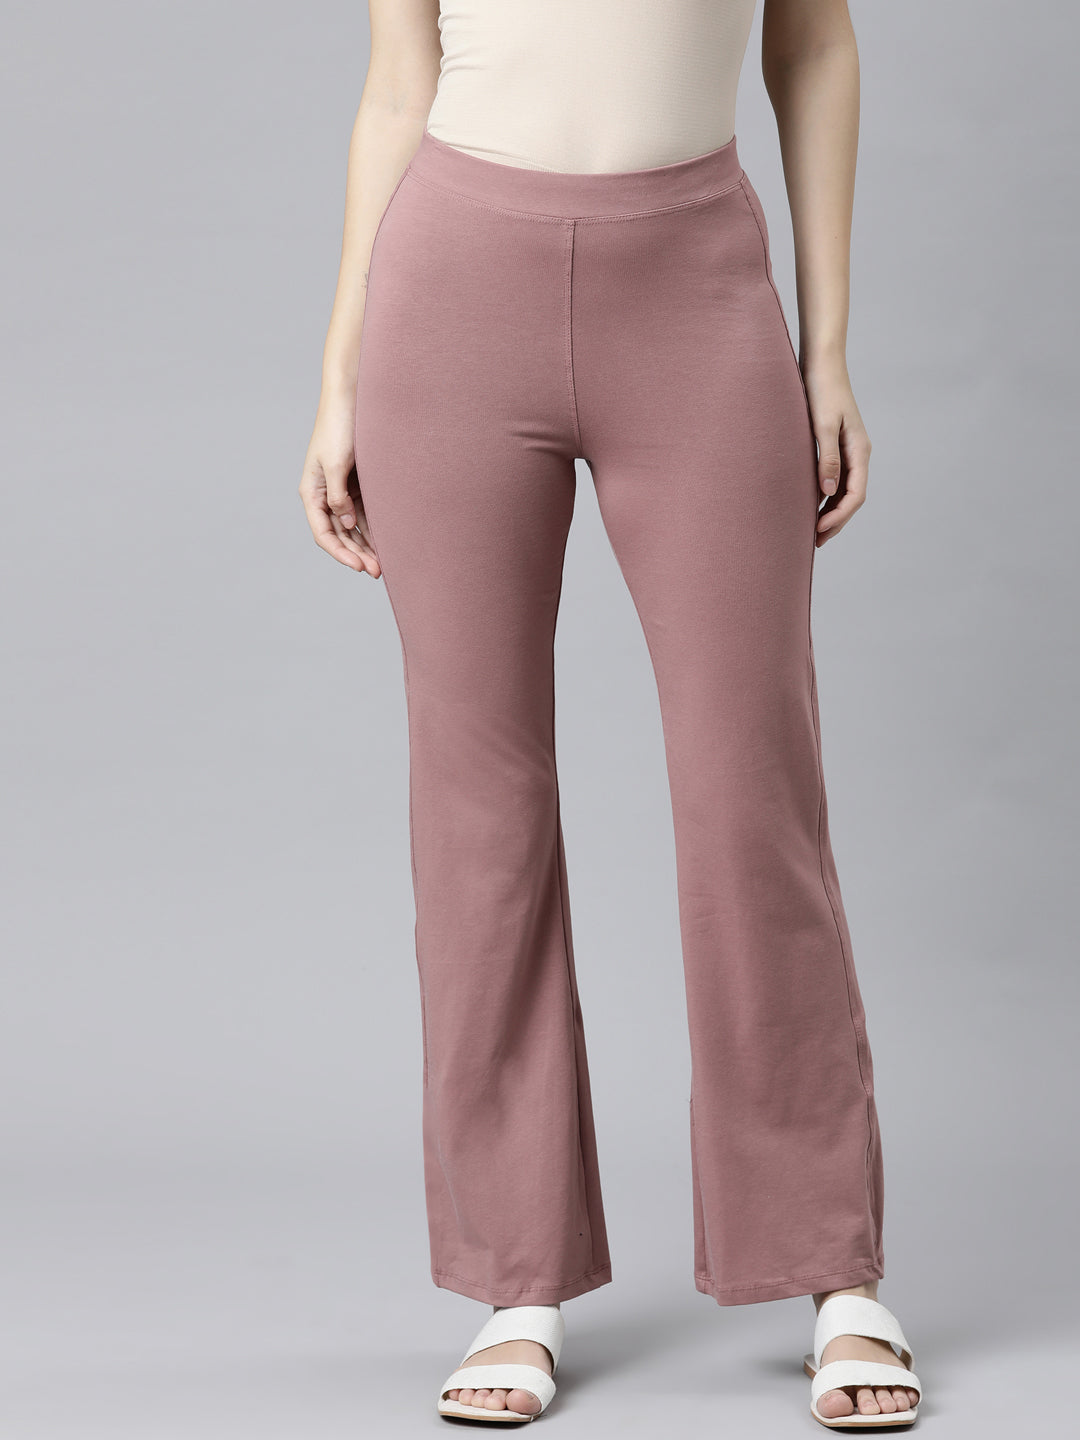 Find High-Rise Flare Pants for Women Online